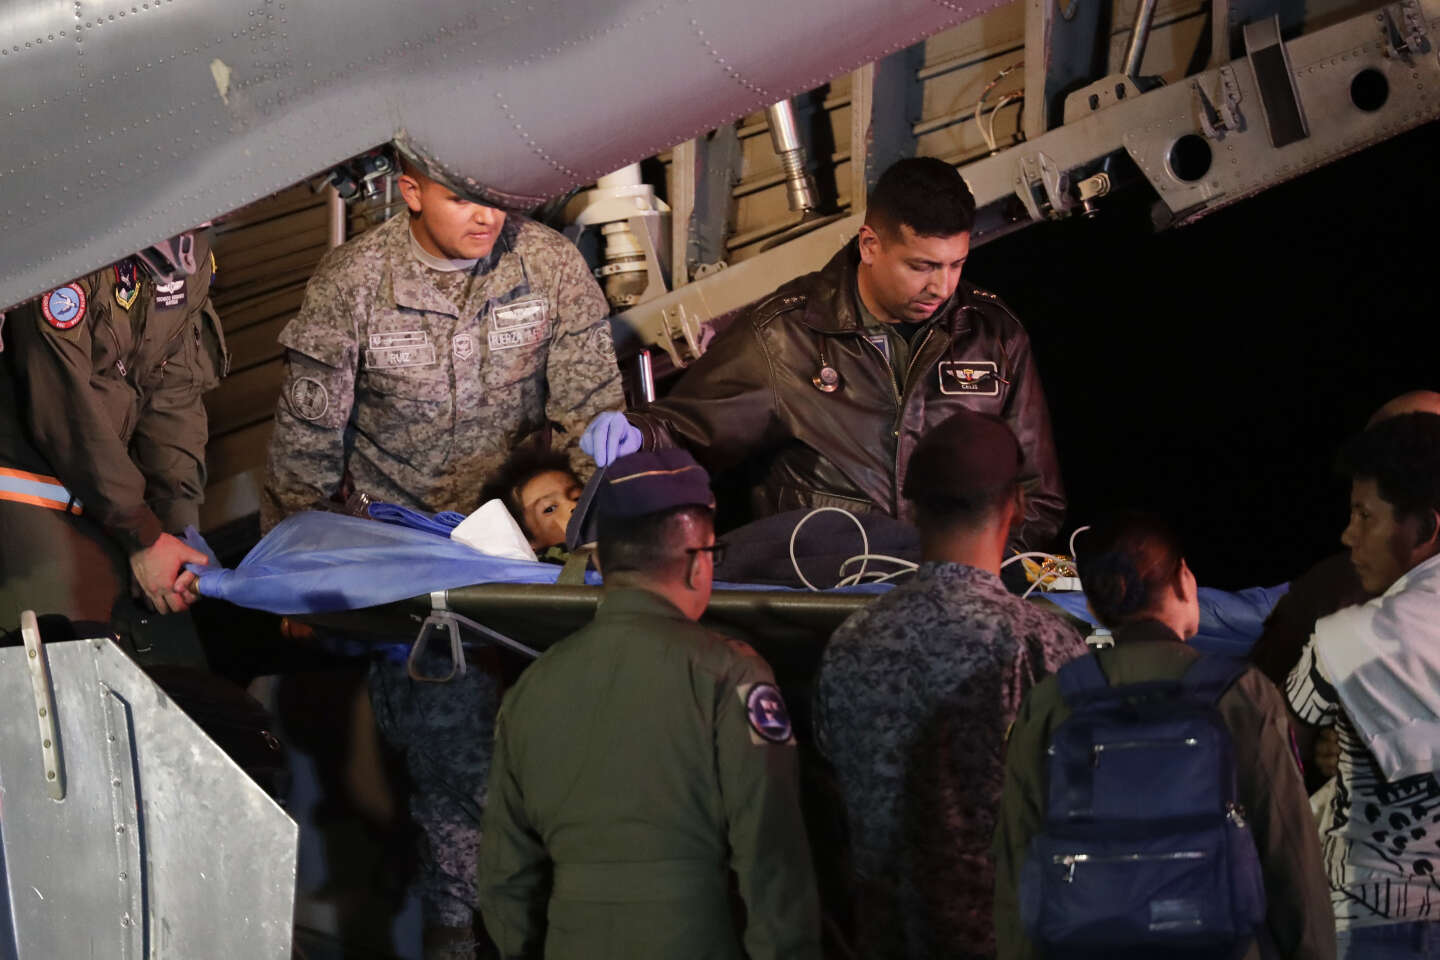 In Colombia, the four children who survived the crash of their plane were found alive